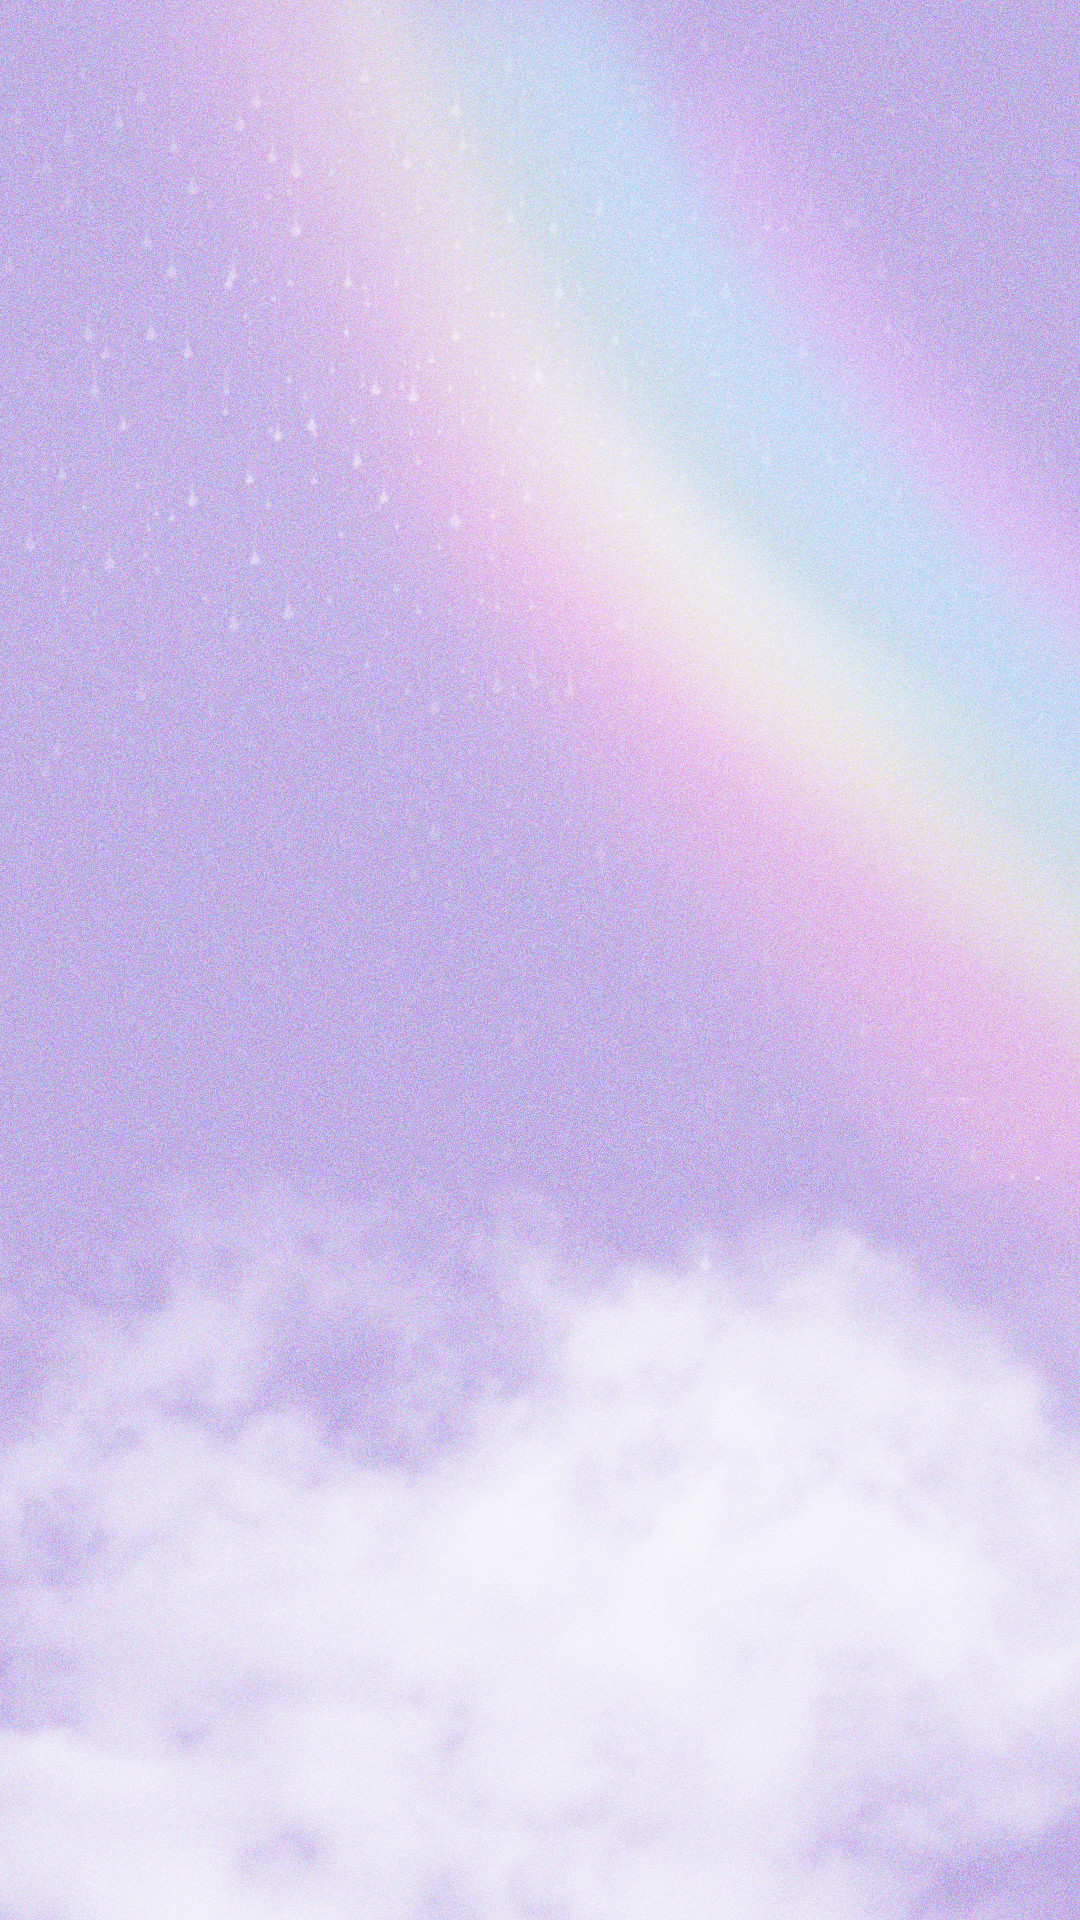 Pastel Rainbow Pictures  Download Free Images on Unsplash